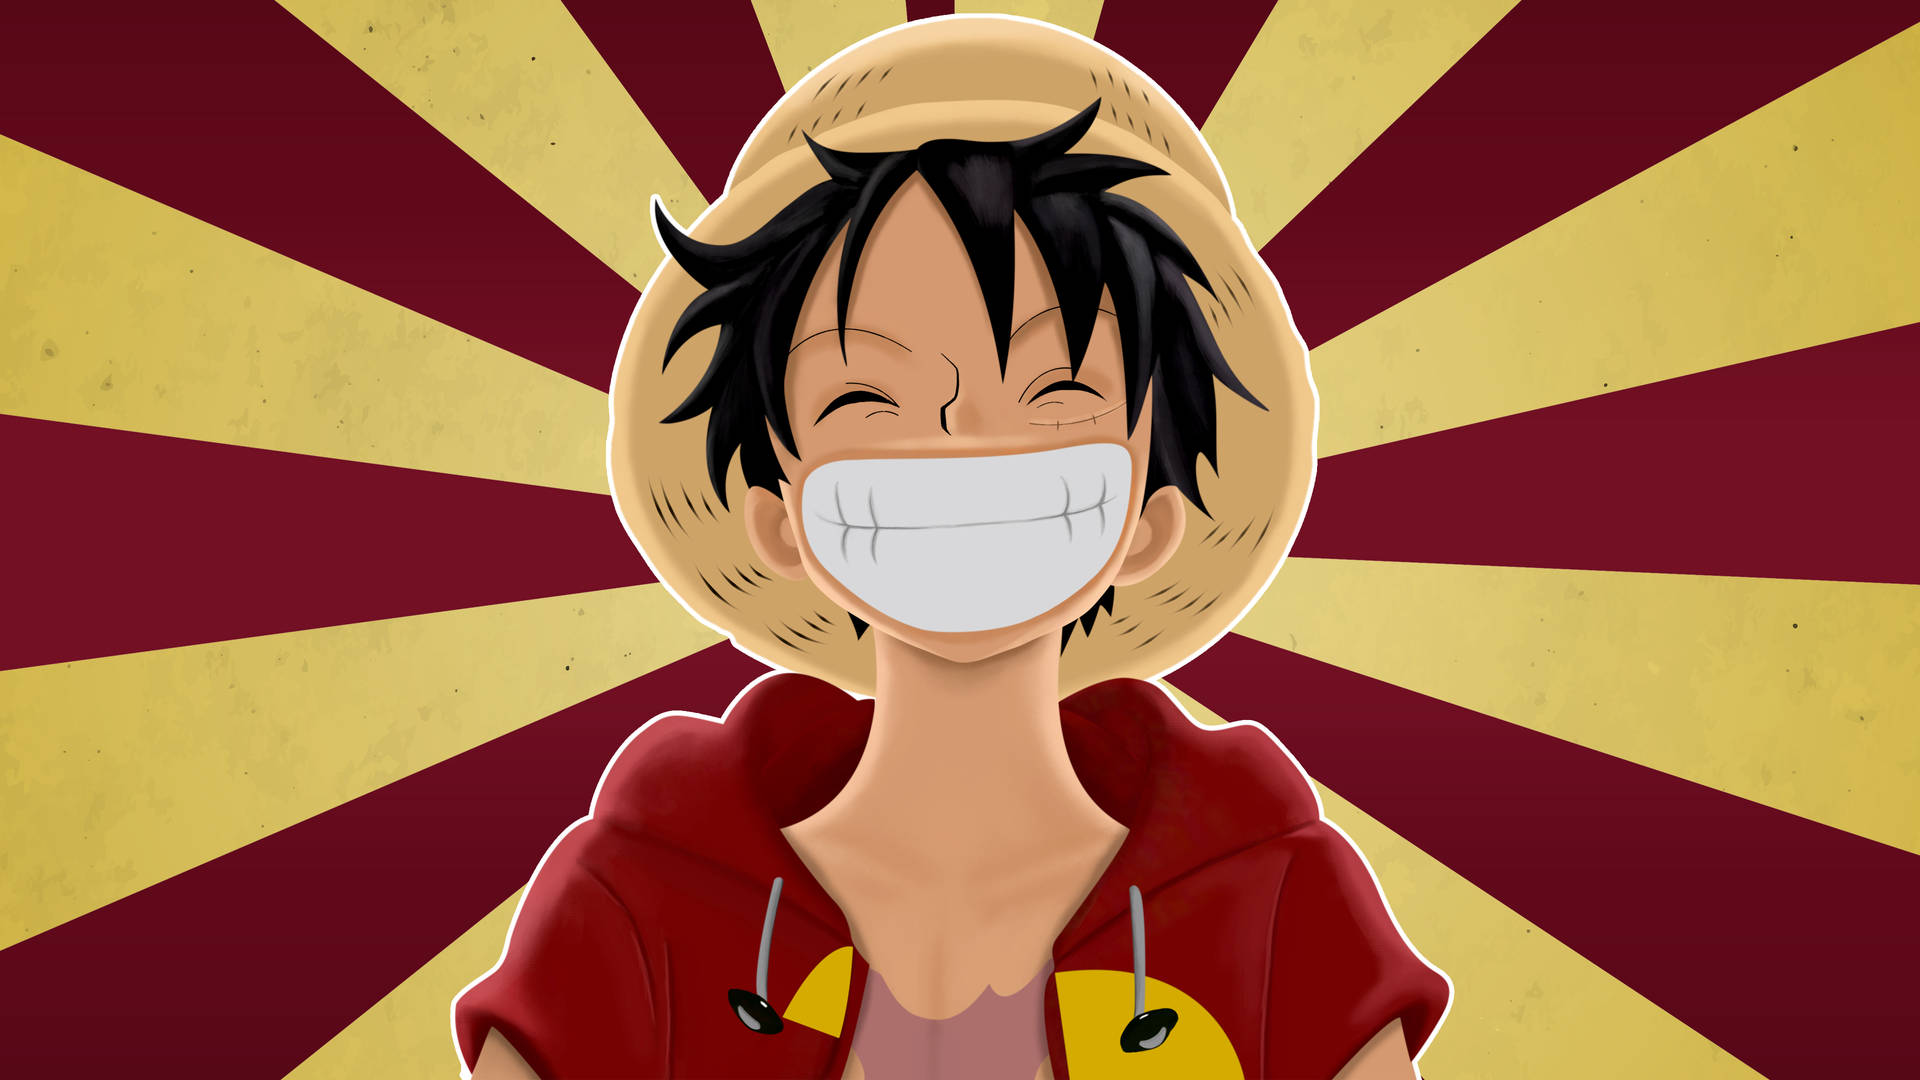 Download Aesthetic One Piece Pfp Monkey D Luffy Wallpaper 